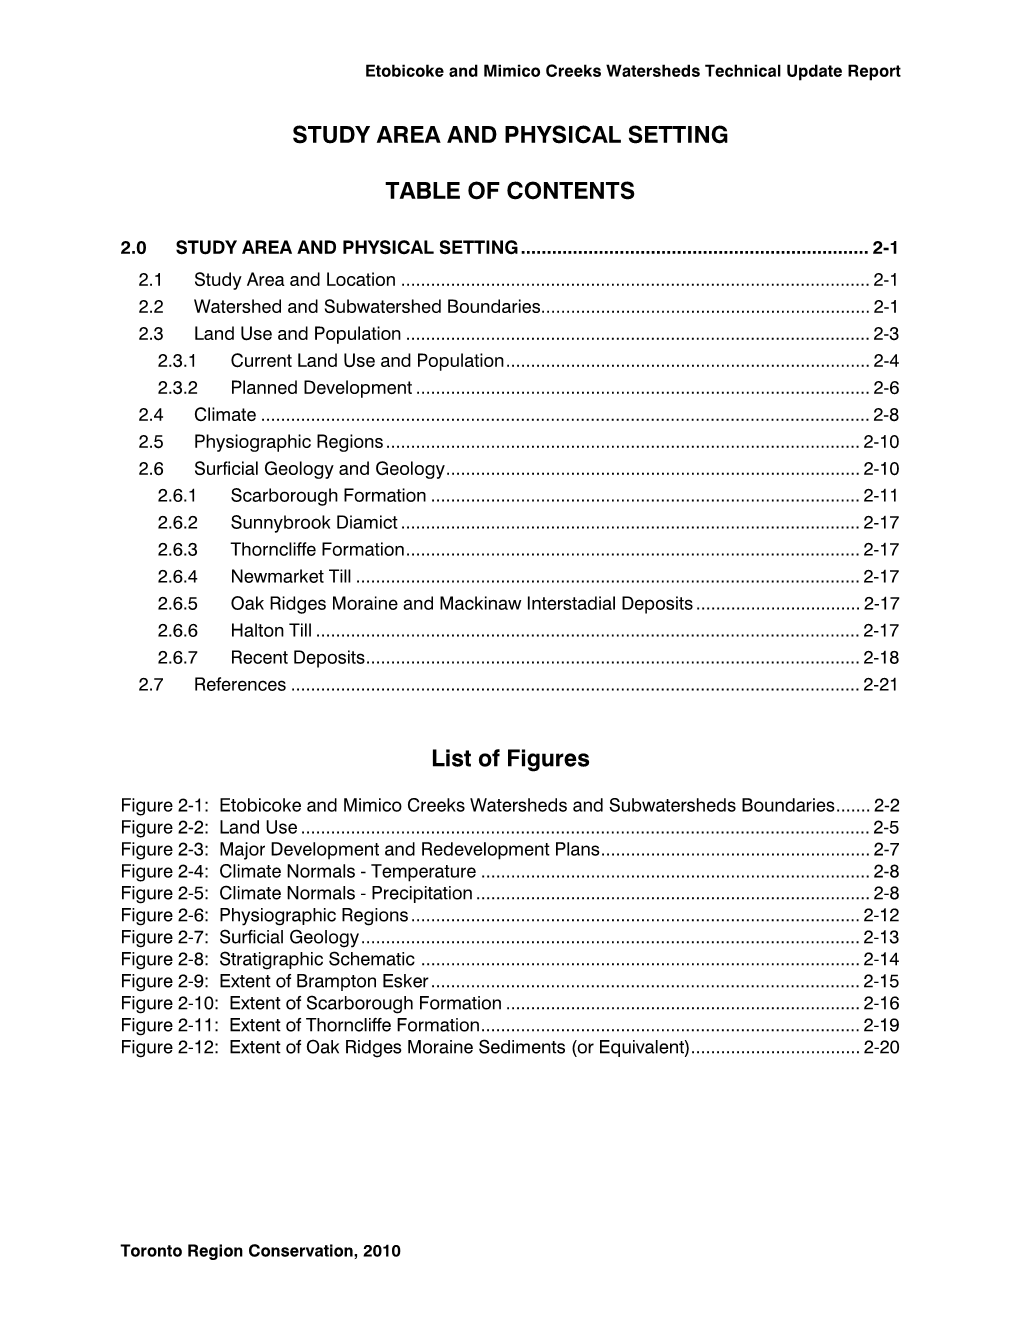 STUDY AREA and PHYSICAL SETTING TABLE of CONTENTS List of Figures